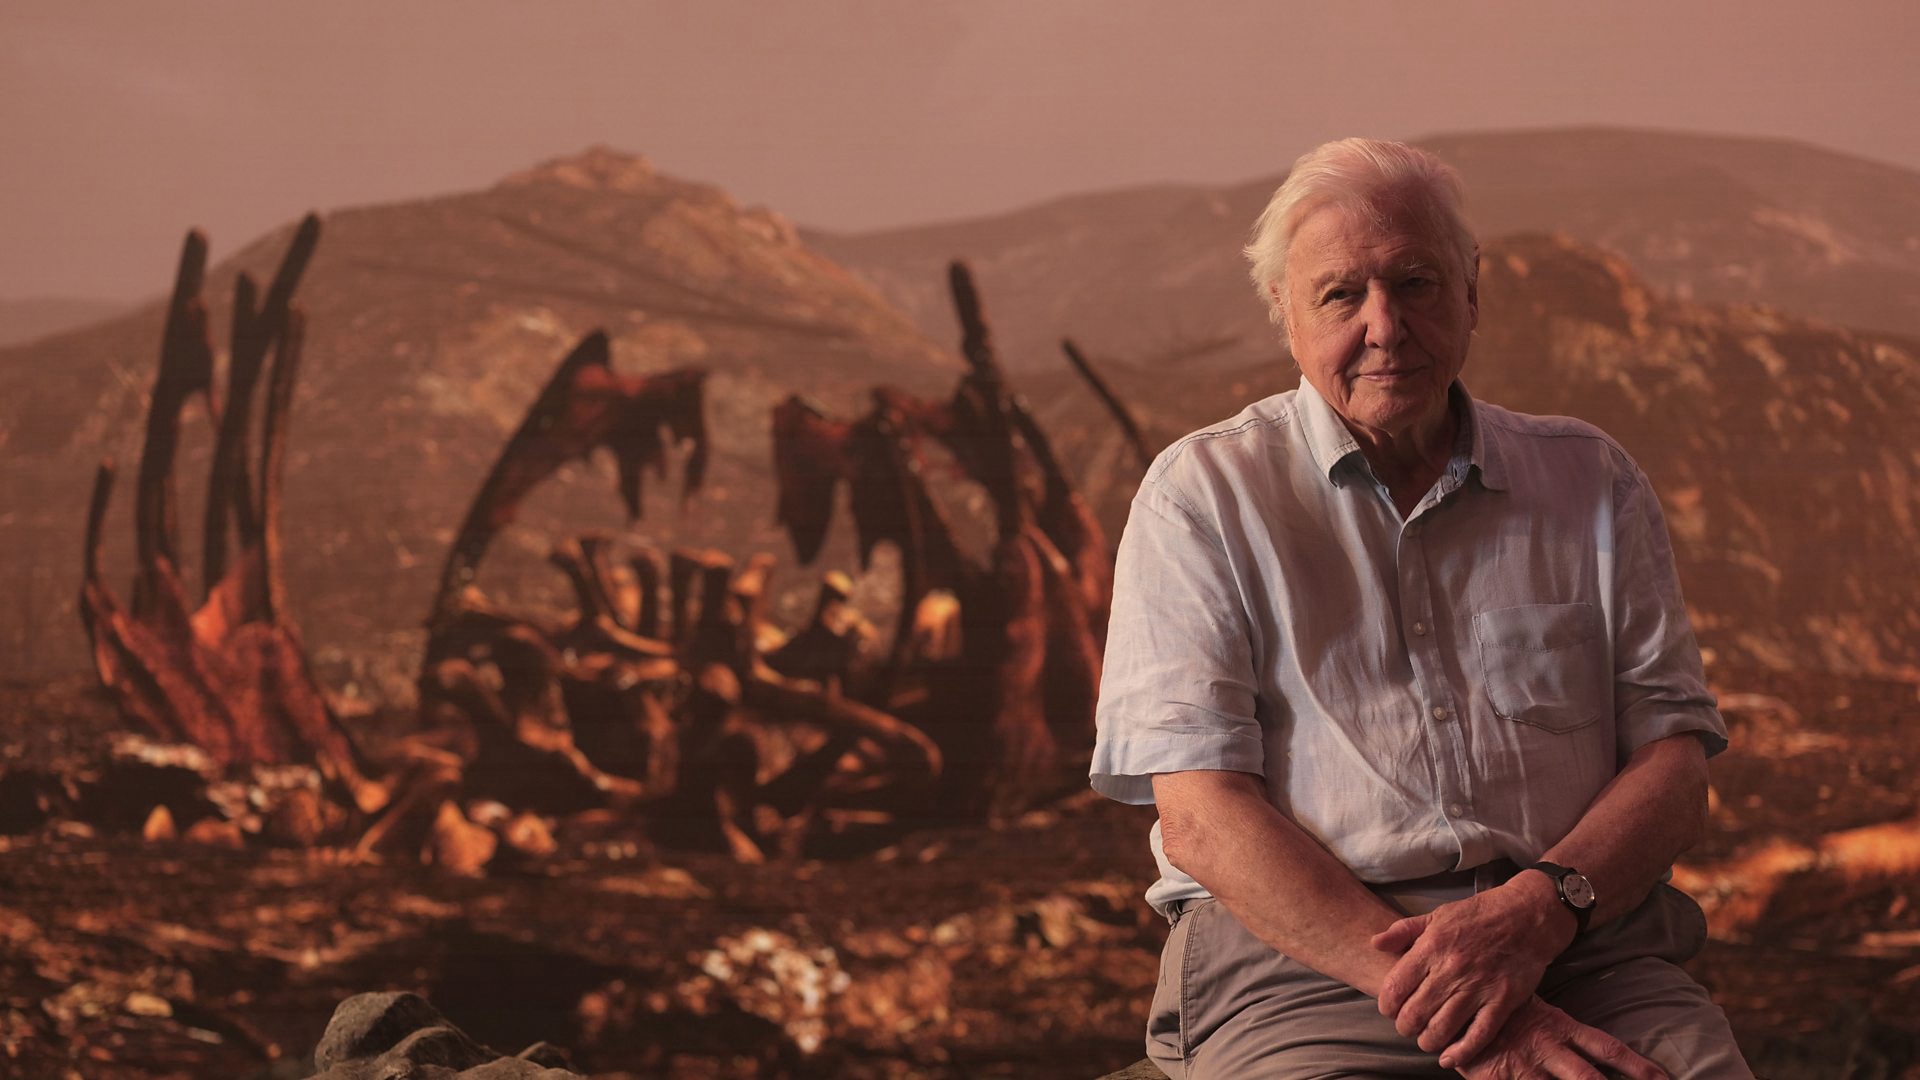 Dinosaurs: The Final Day with David Attenborough / Dinosaurs: The Final Day with David Attenborough (2022)